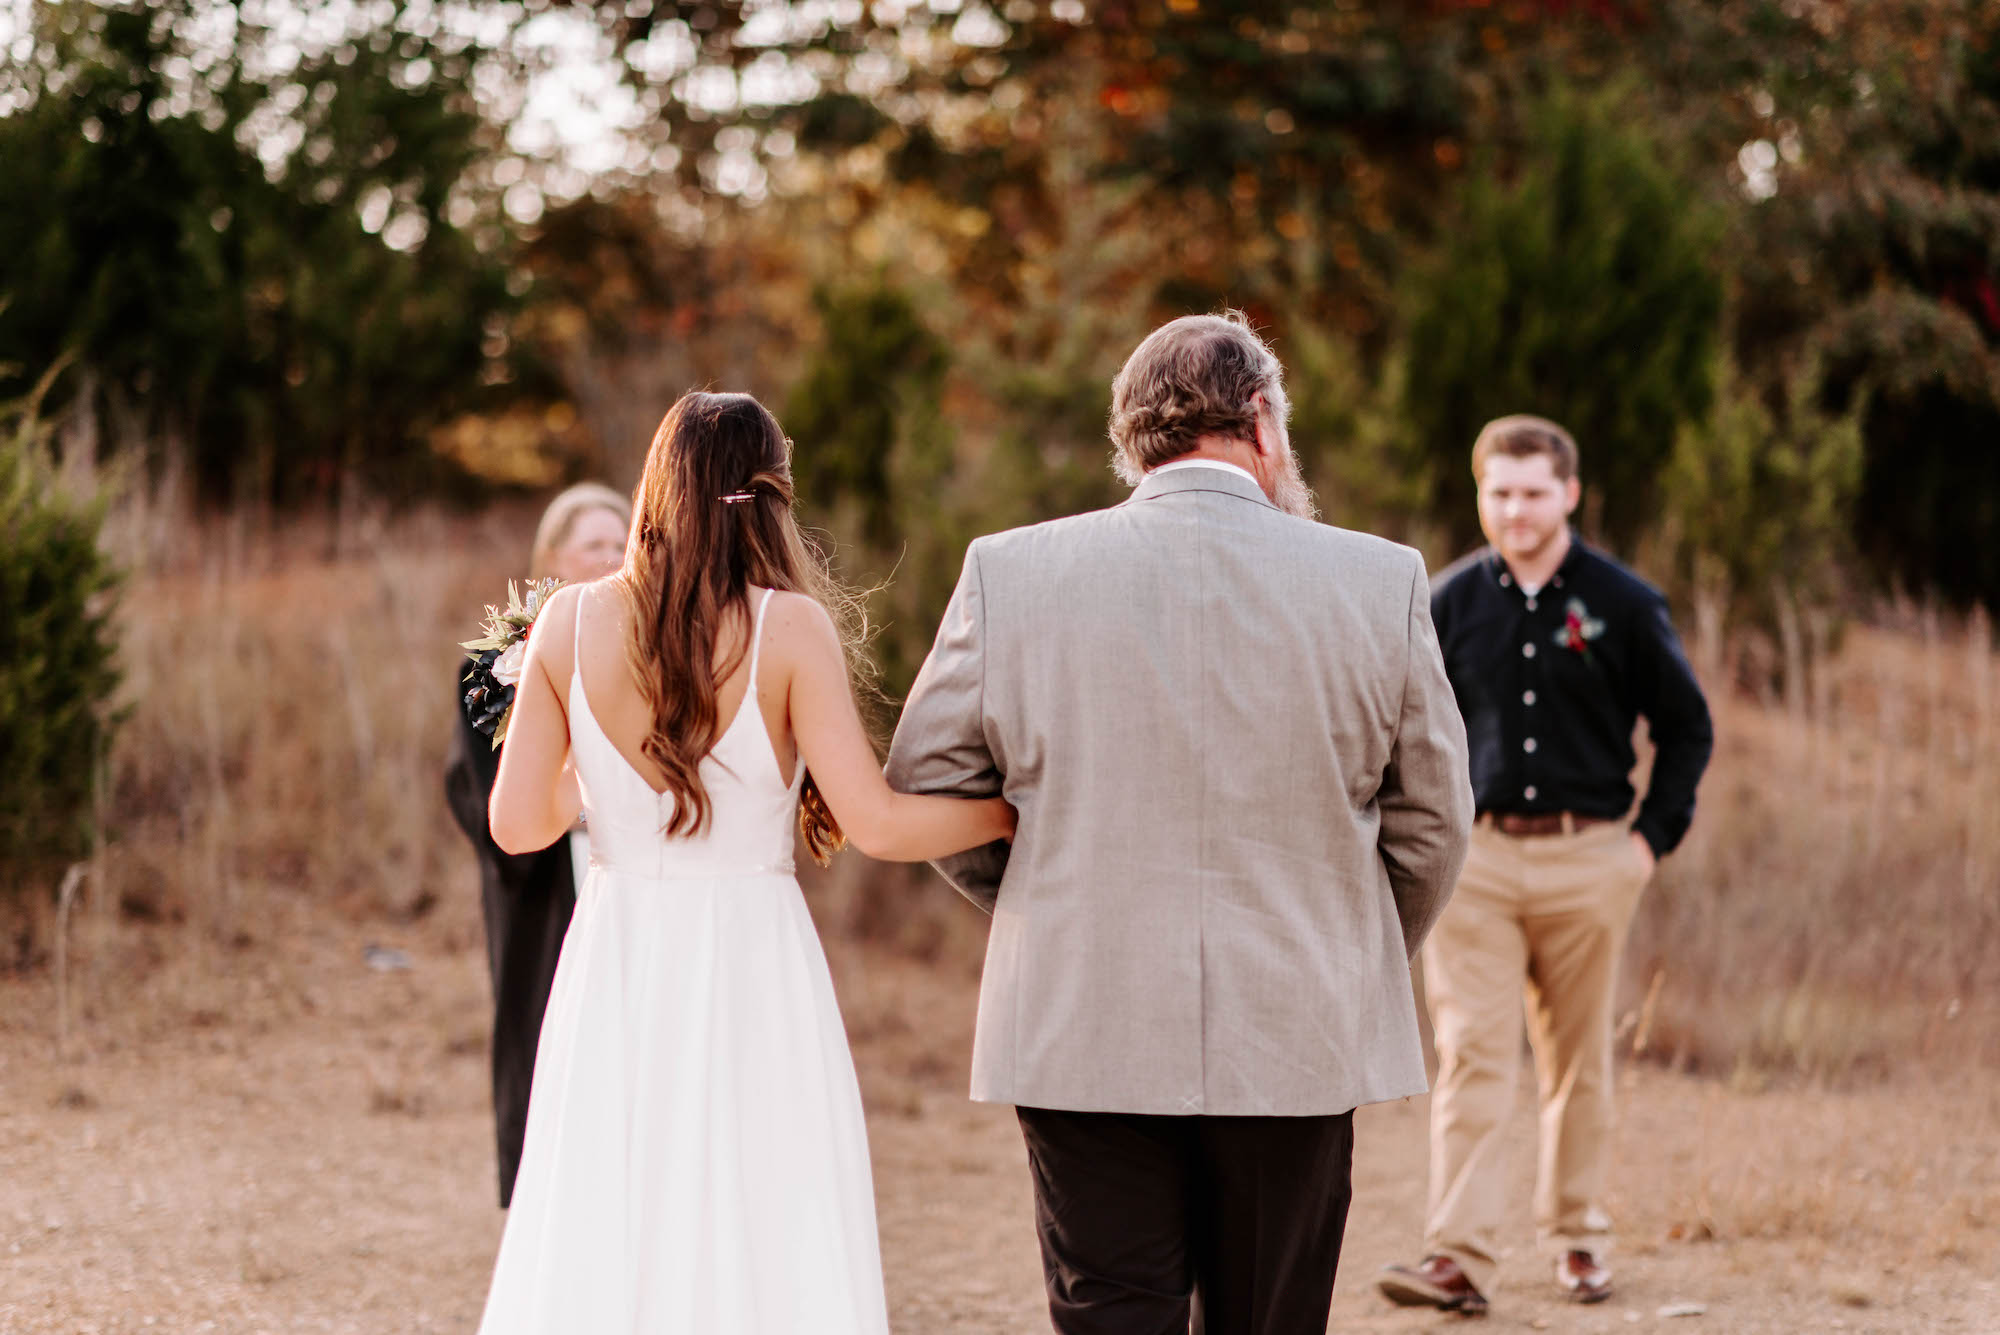 How to Include Loved Ones in Your Elopement